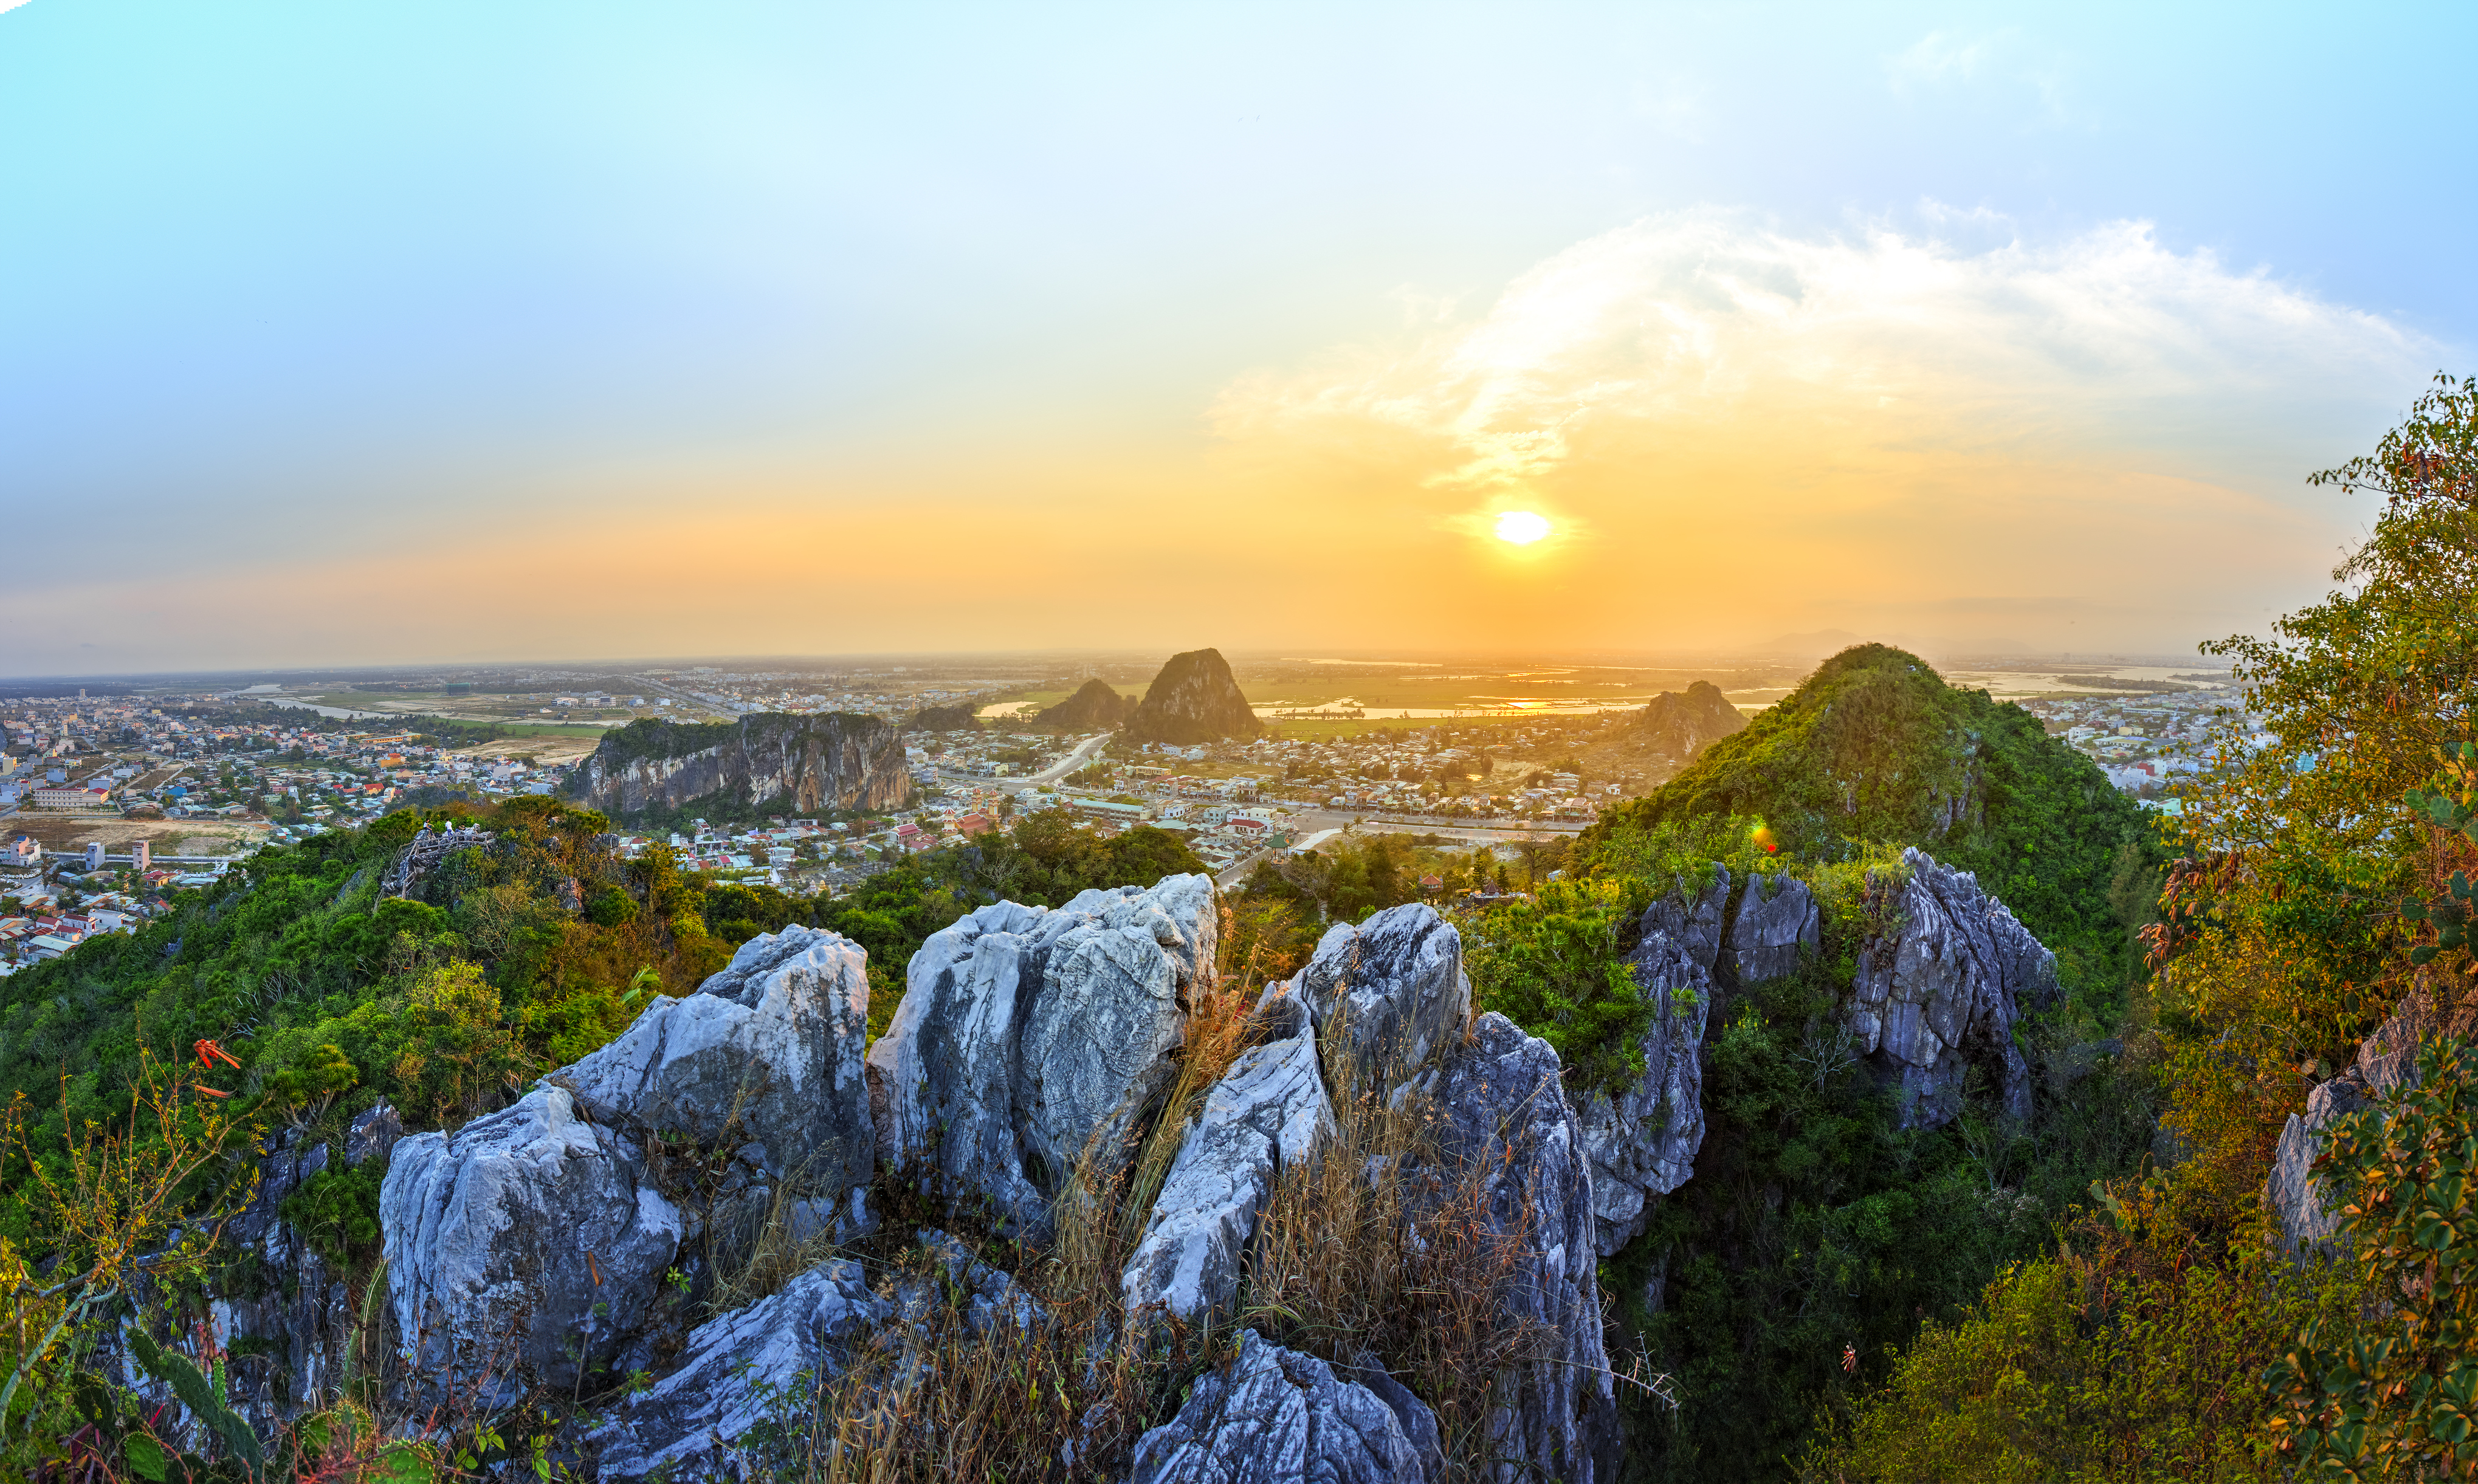 View from the Marble mountains, Da Nang (Thinkstock/PA)